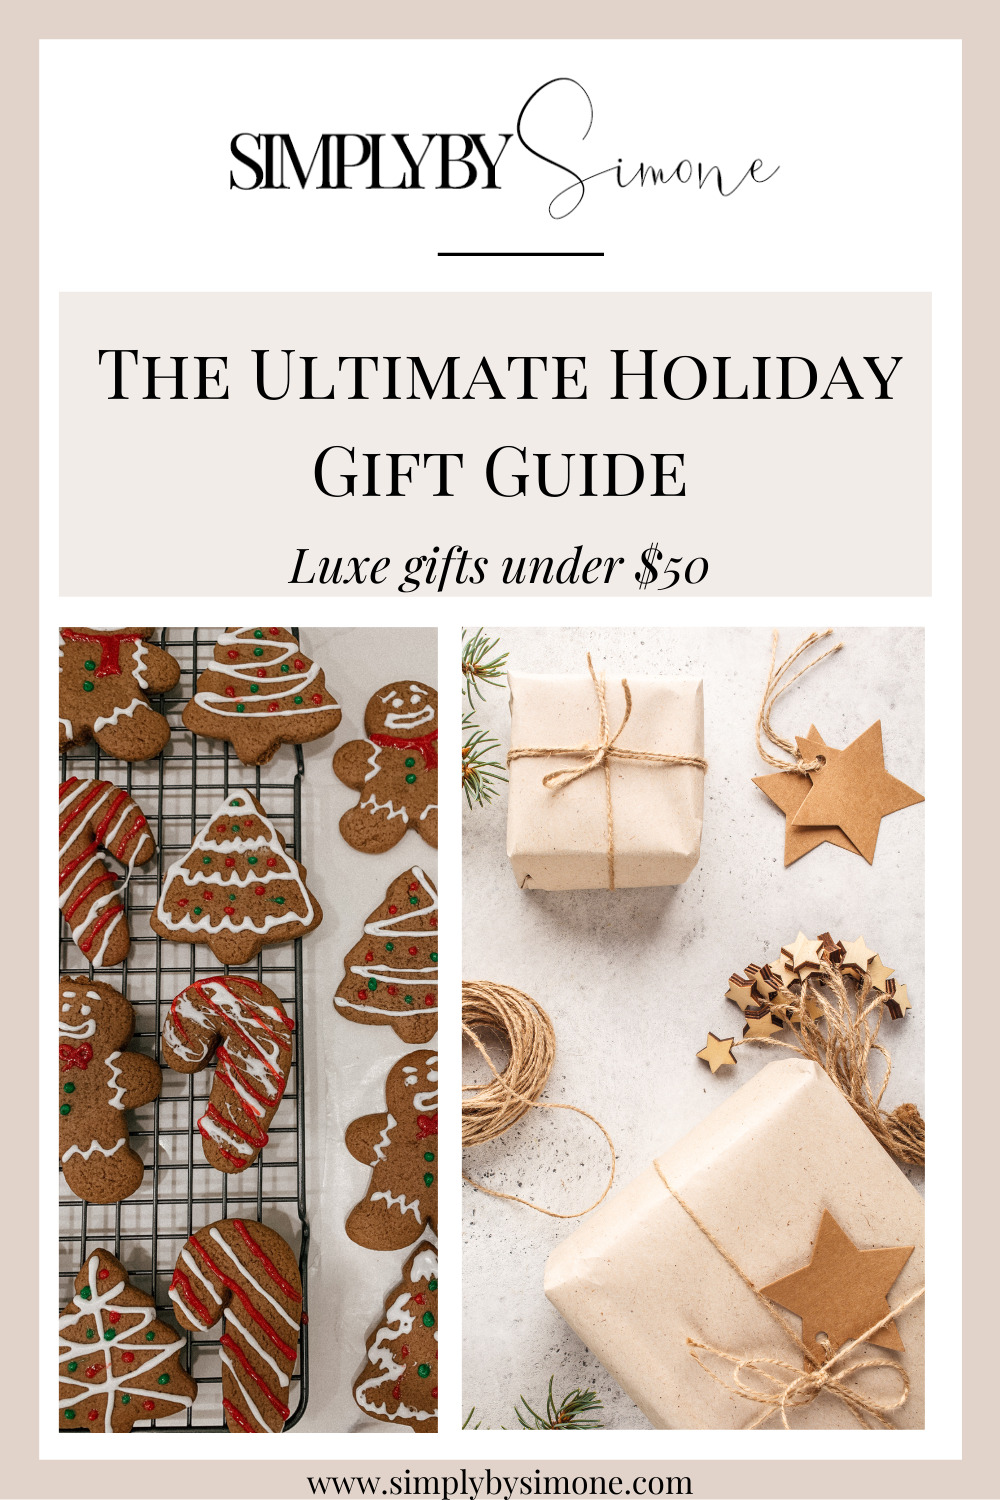 The Ultimate Holiday Gift Guide - All Gifts Under $50 - Simply by Simone - Christmas Gift Ideas - Gifts for her under 50 - Gifts for Him Under 50 #gifts #christmasgifts #holidaygifts #giftsforher #giftsforhim #presents